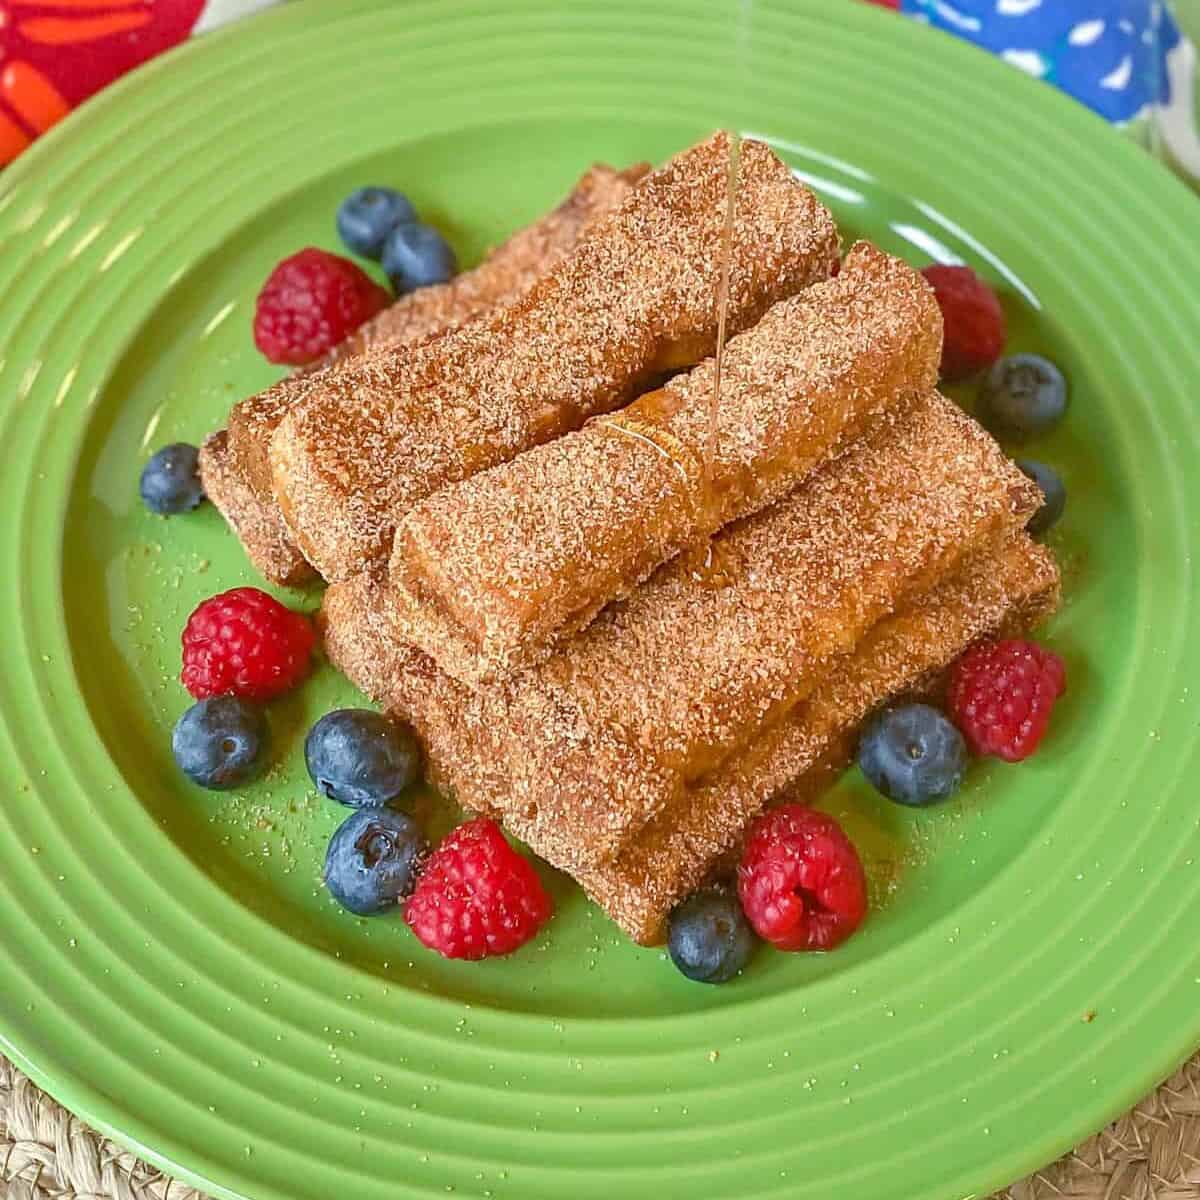 cinnamon french toast sticks on plate with berries and syrup